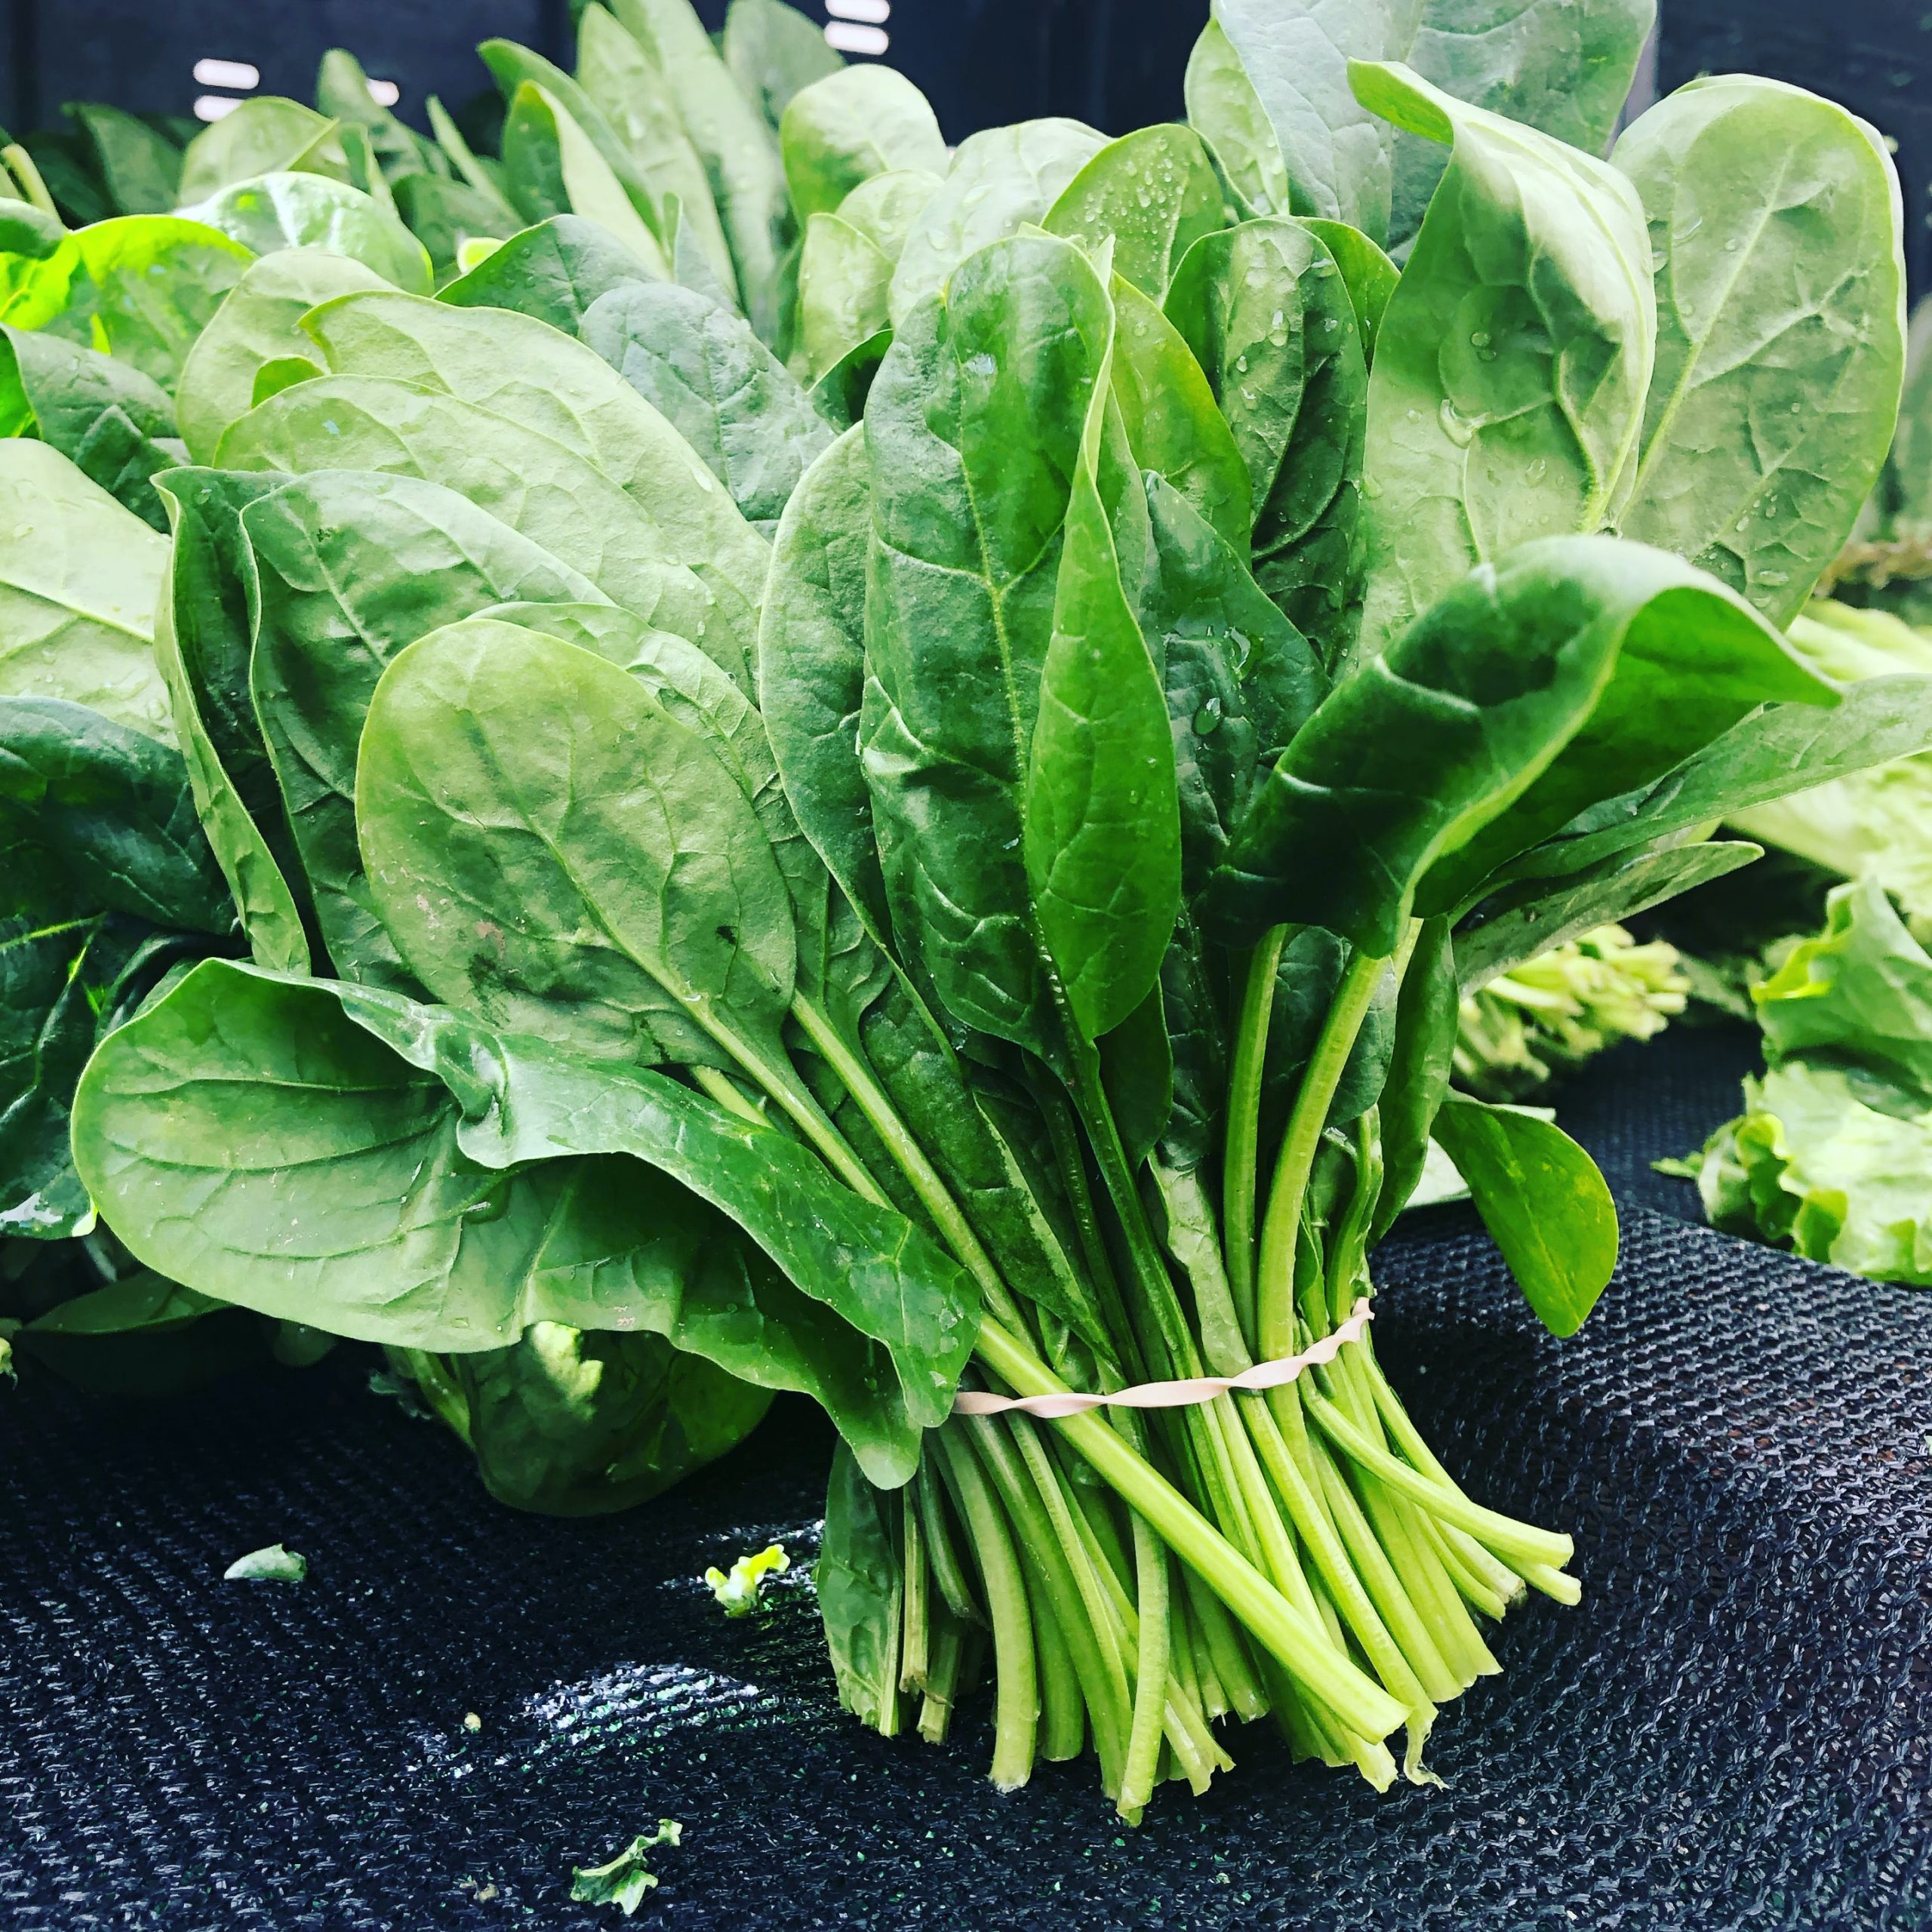 Chard Vs Spinach: Are They The Same Thing?